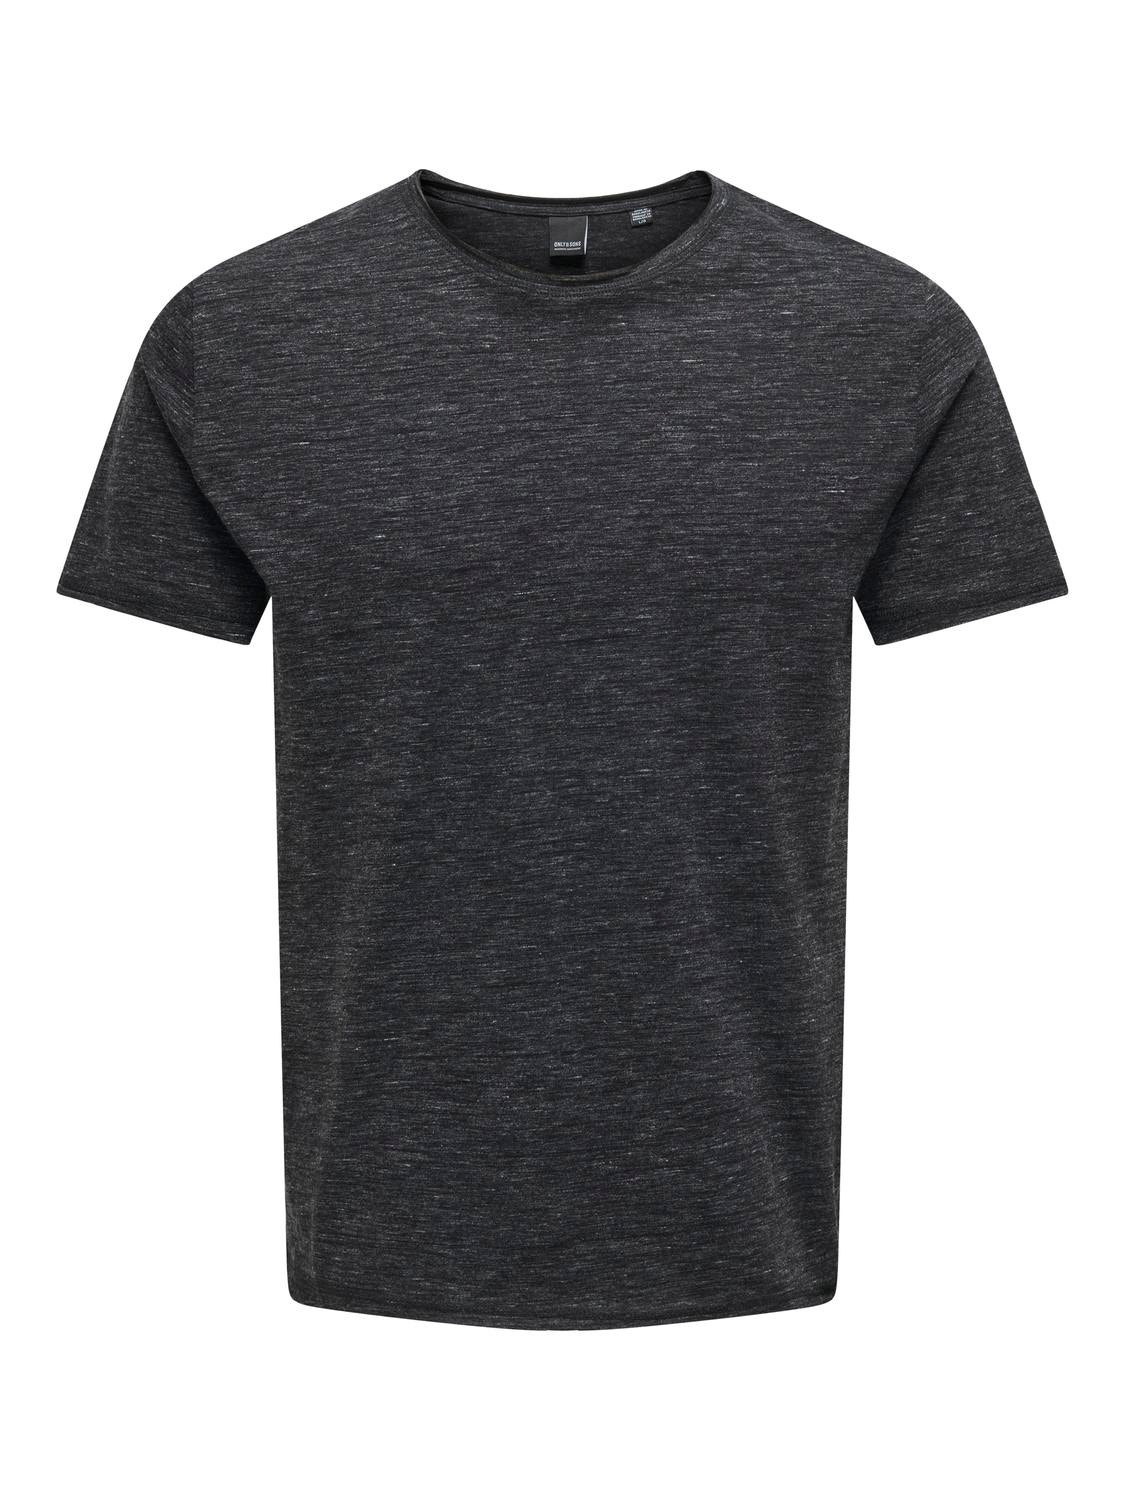 ONLY & SONS O-neck t-shirt -Black - 22005108